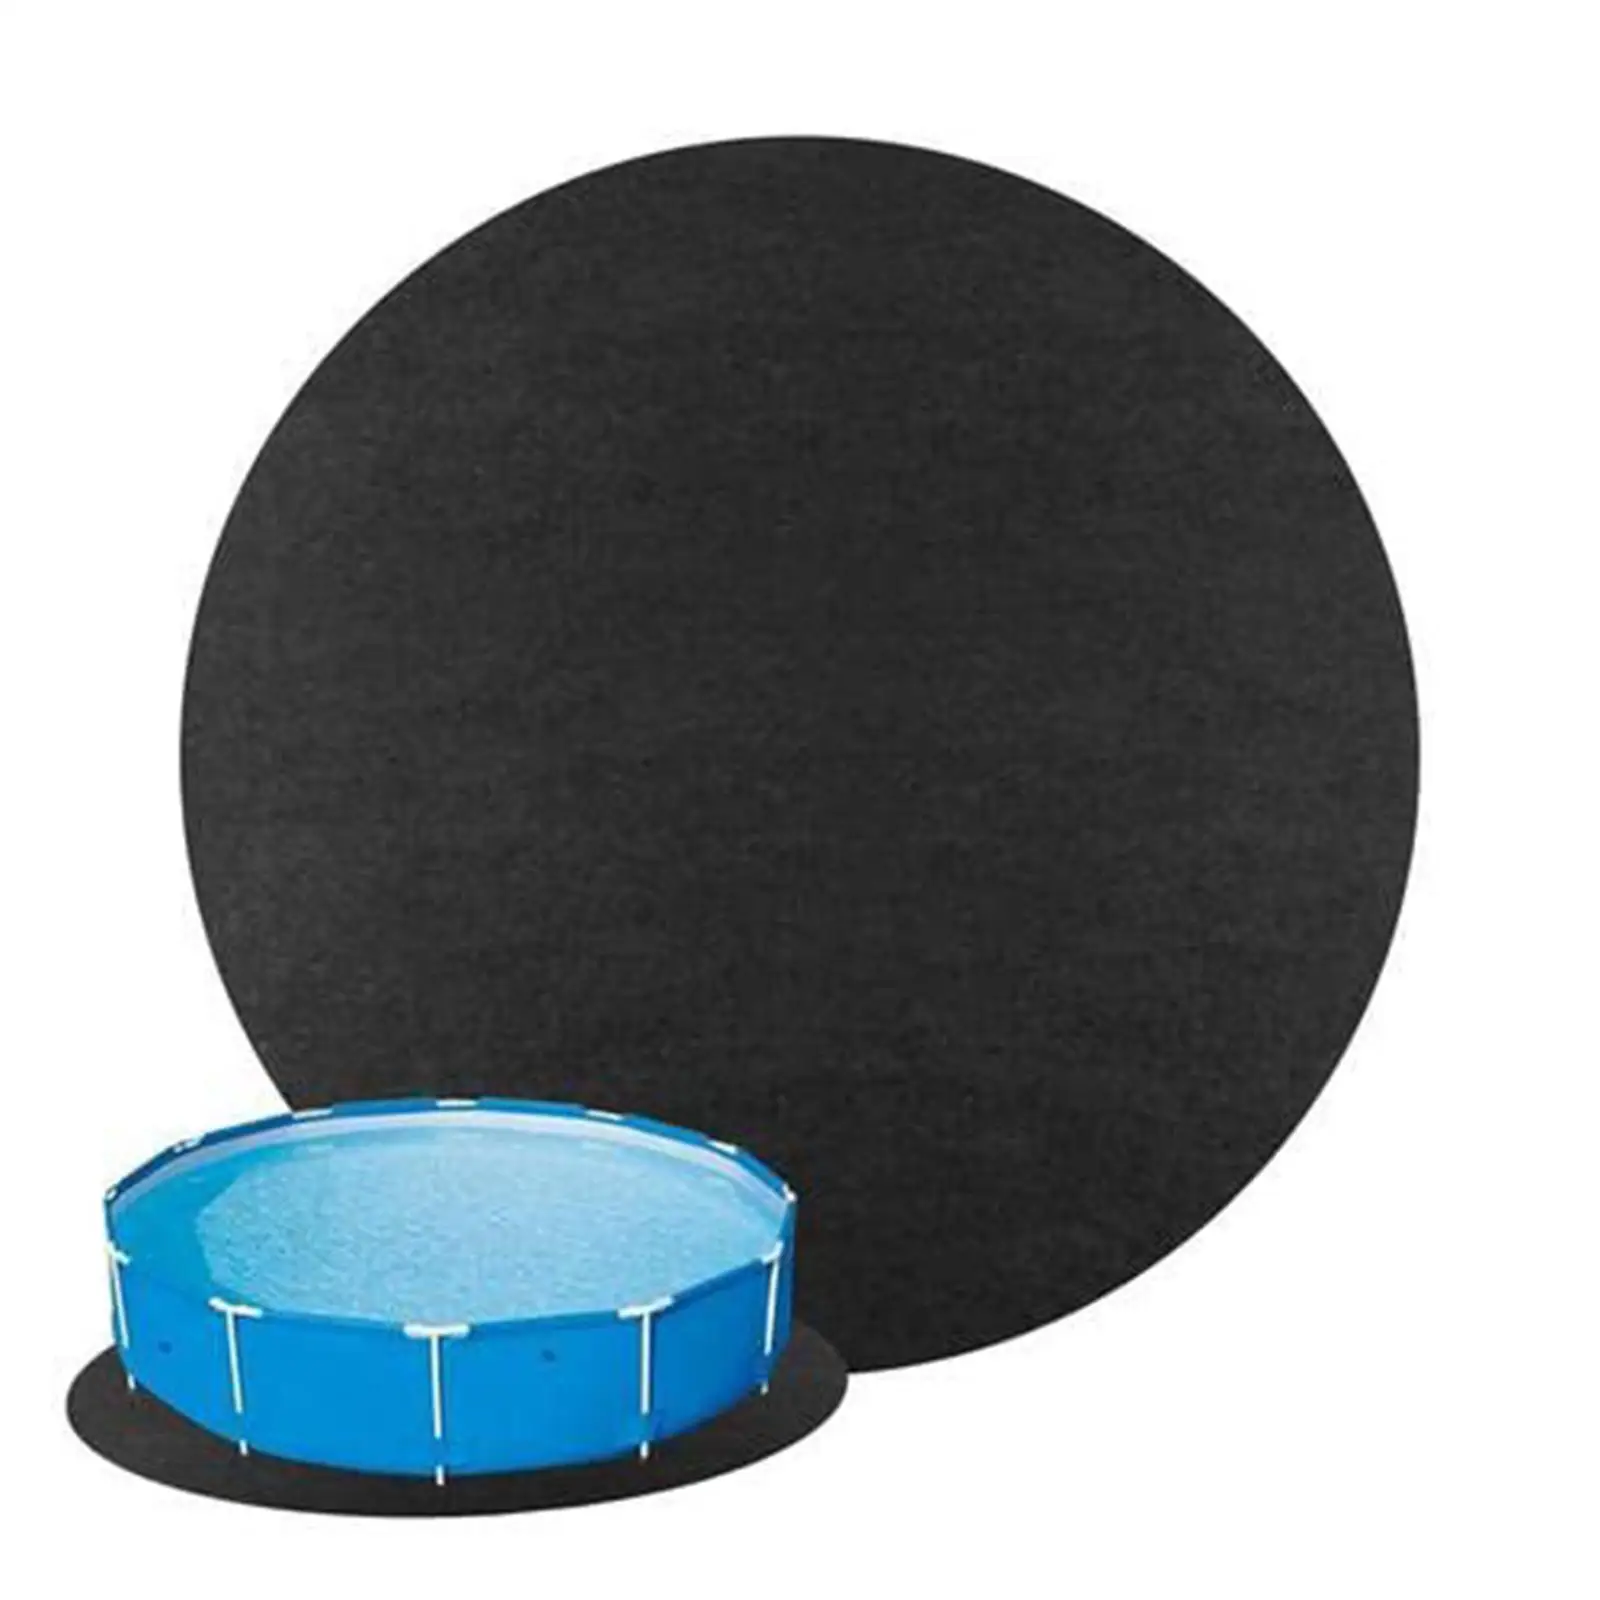 Pool Liner Pad, Pool Accessories Summer Pool Pads for above Ground Pool, for 4m Swimming Pool Inflatable pool